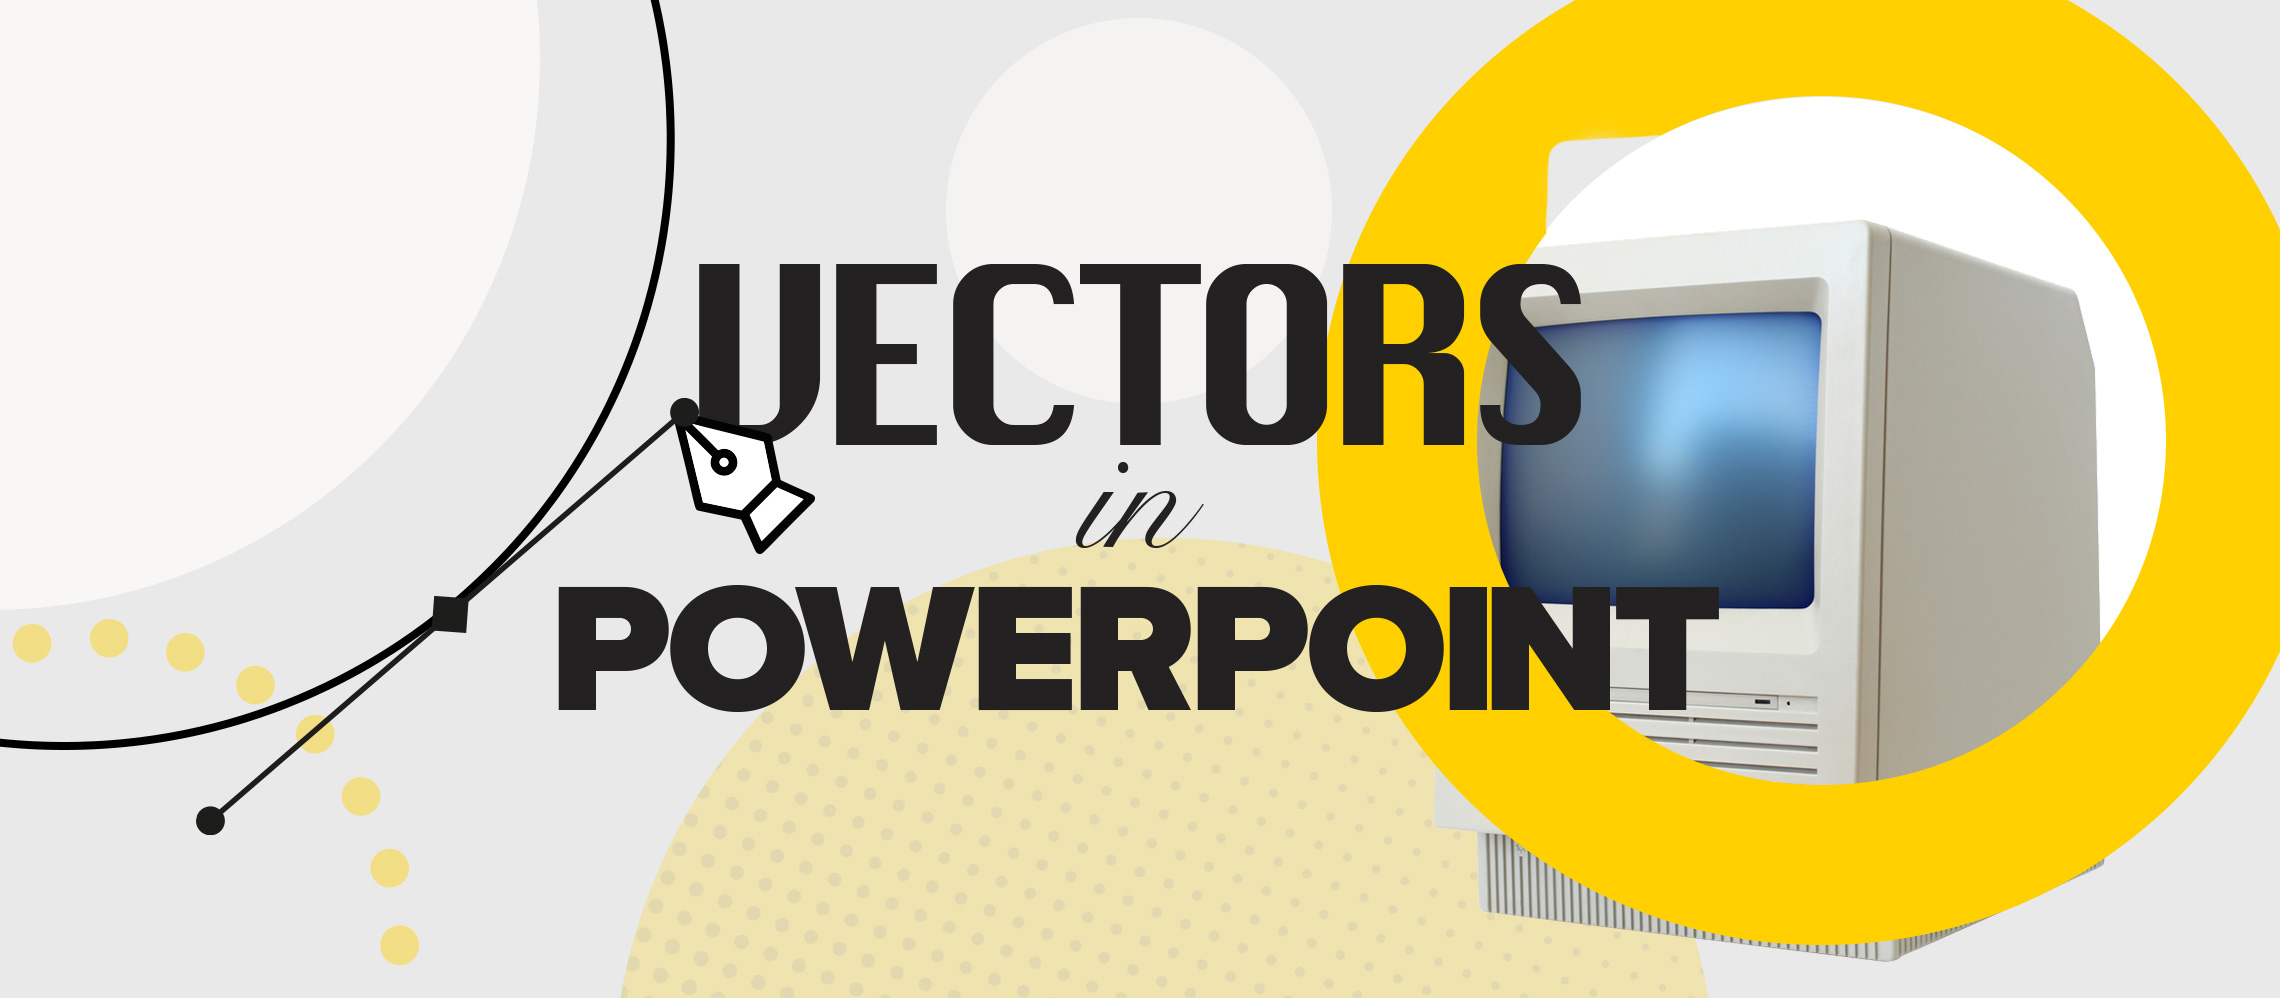 How To Use Powerpoint For Mac 2018